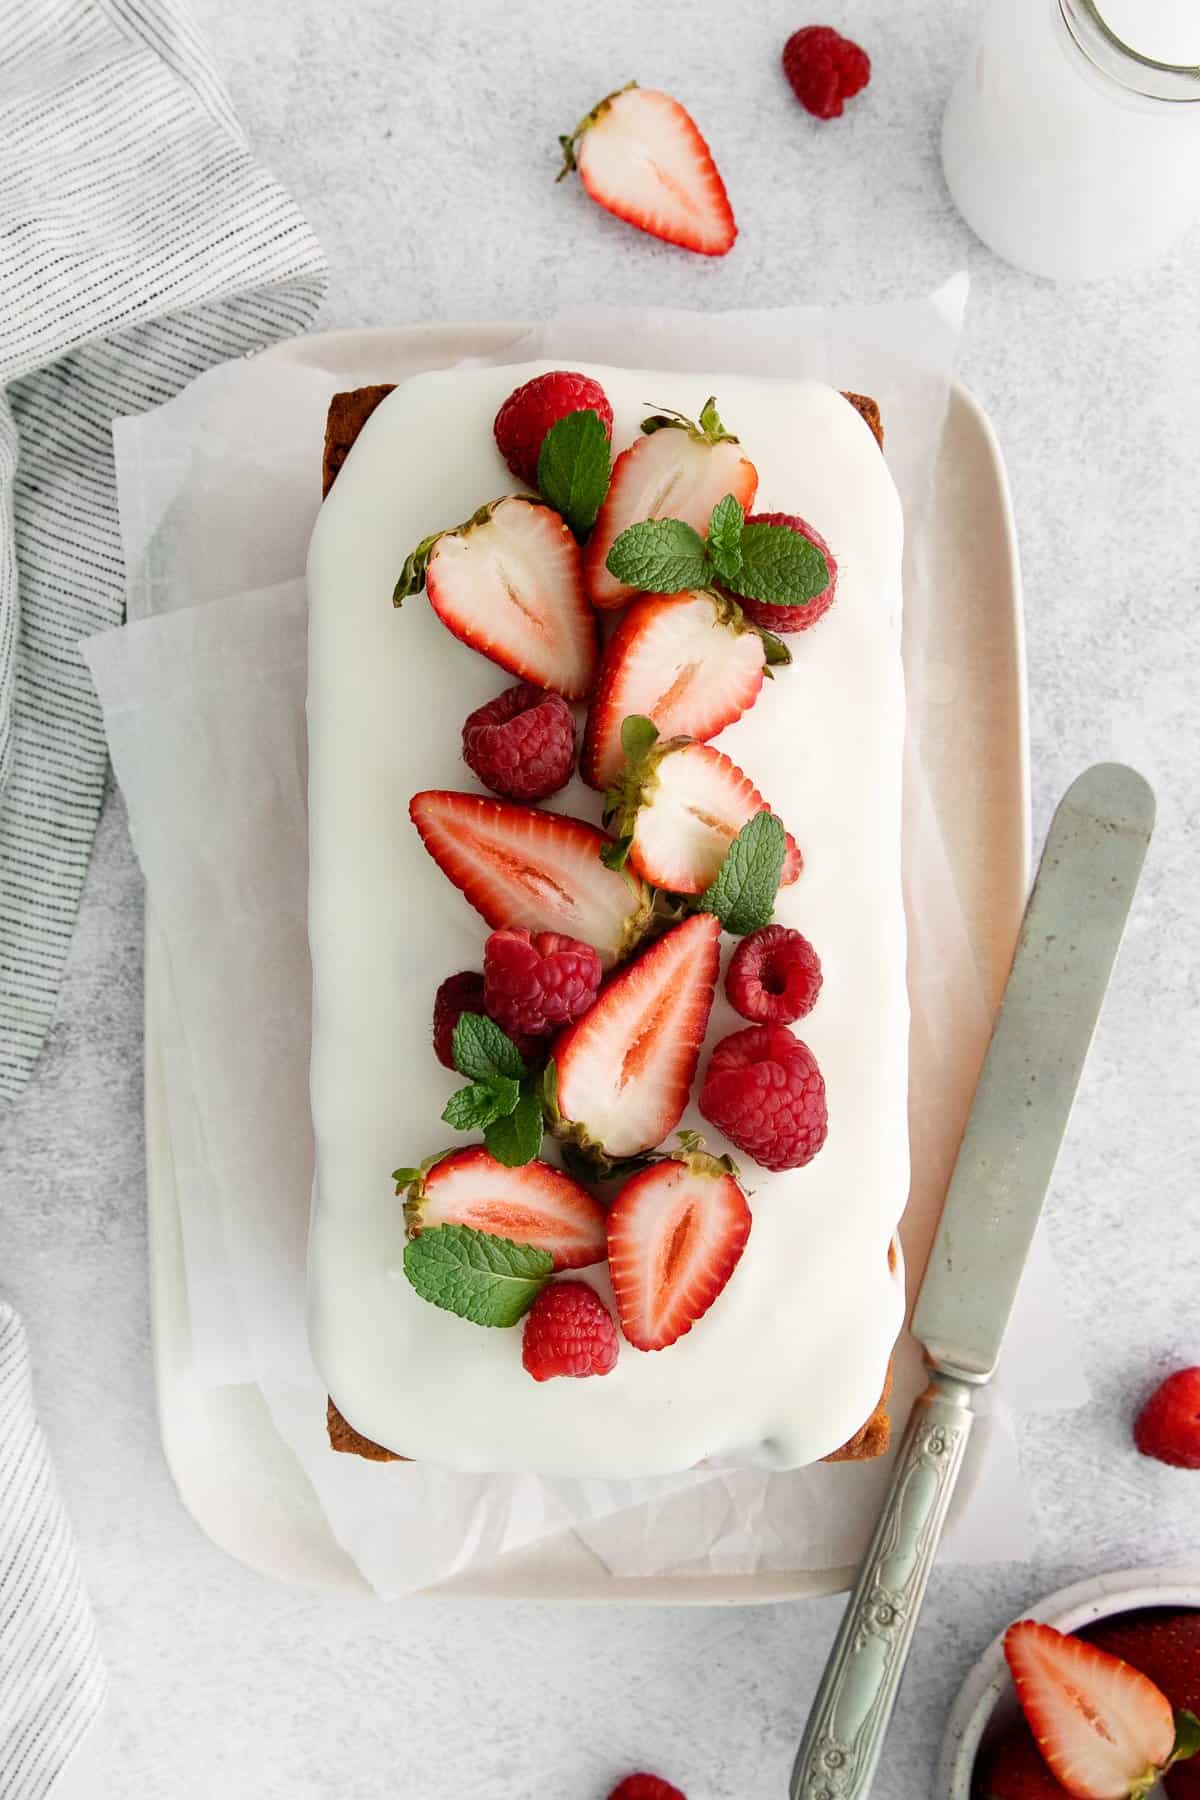 Cream cheese pound caked topped with strawberries and raspberries.